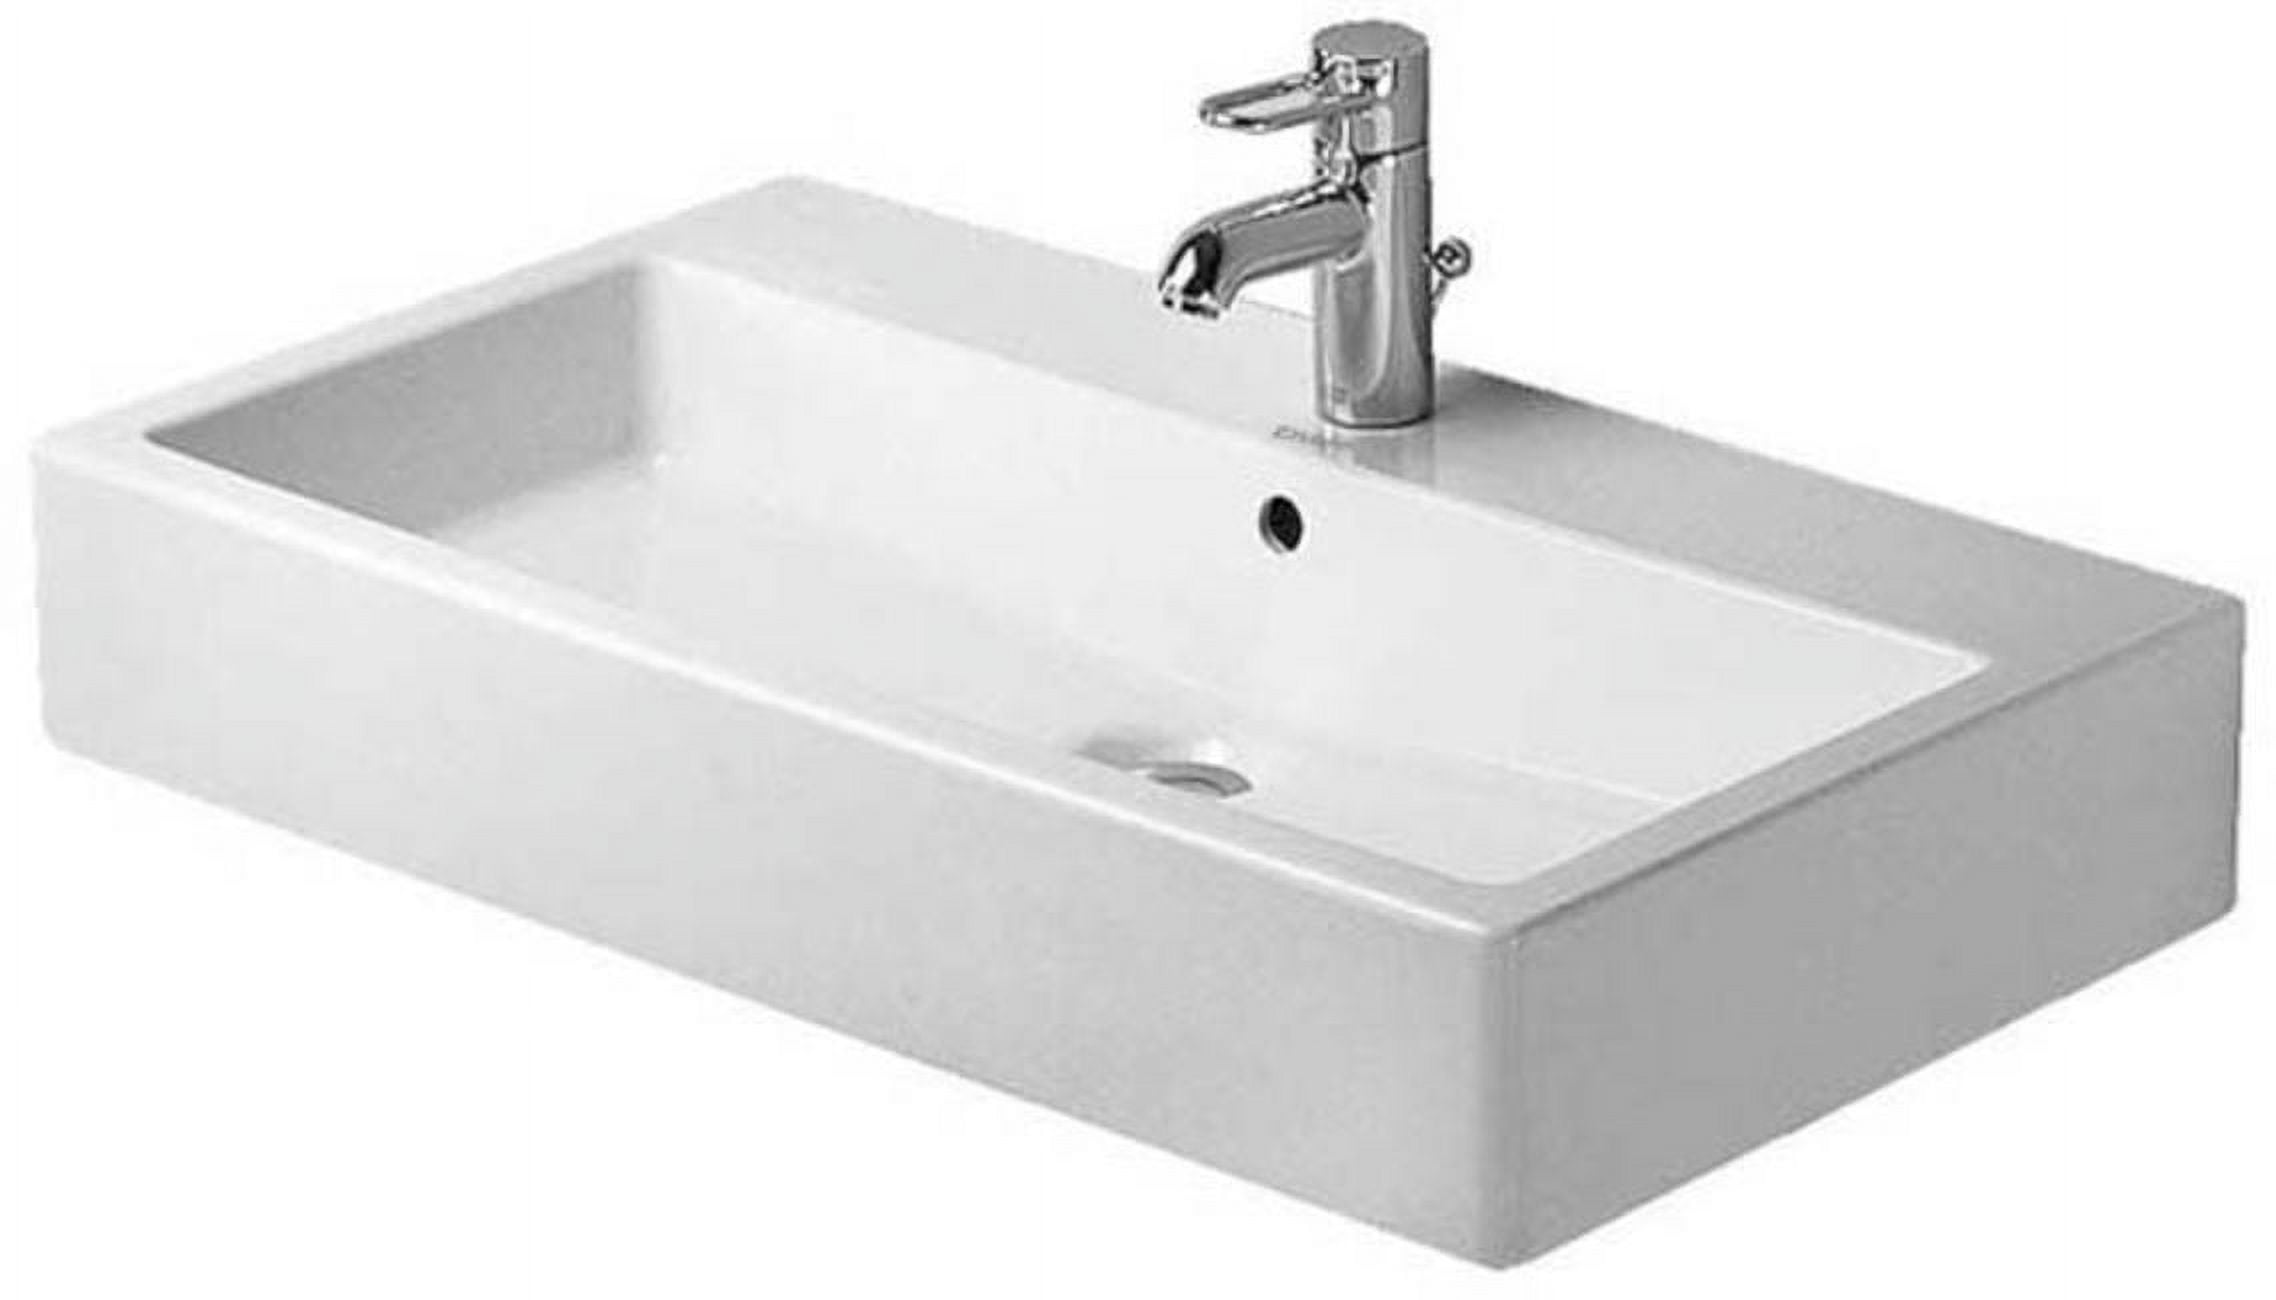 454700000 Vero Wall Mount Bathroom Sink With Overflow And 1 Tap Platform